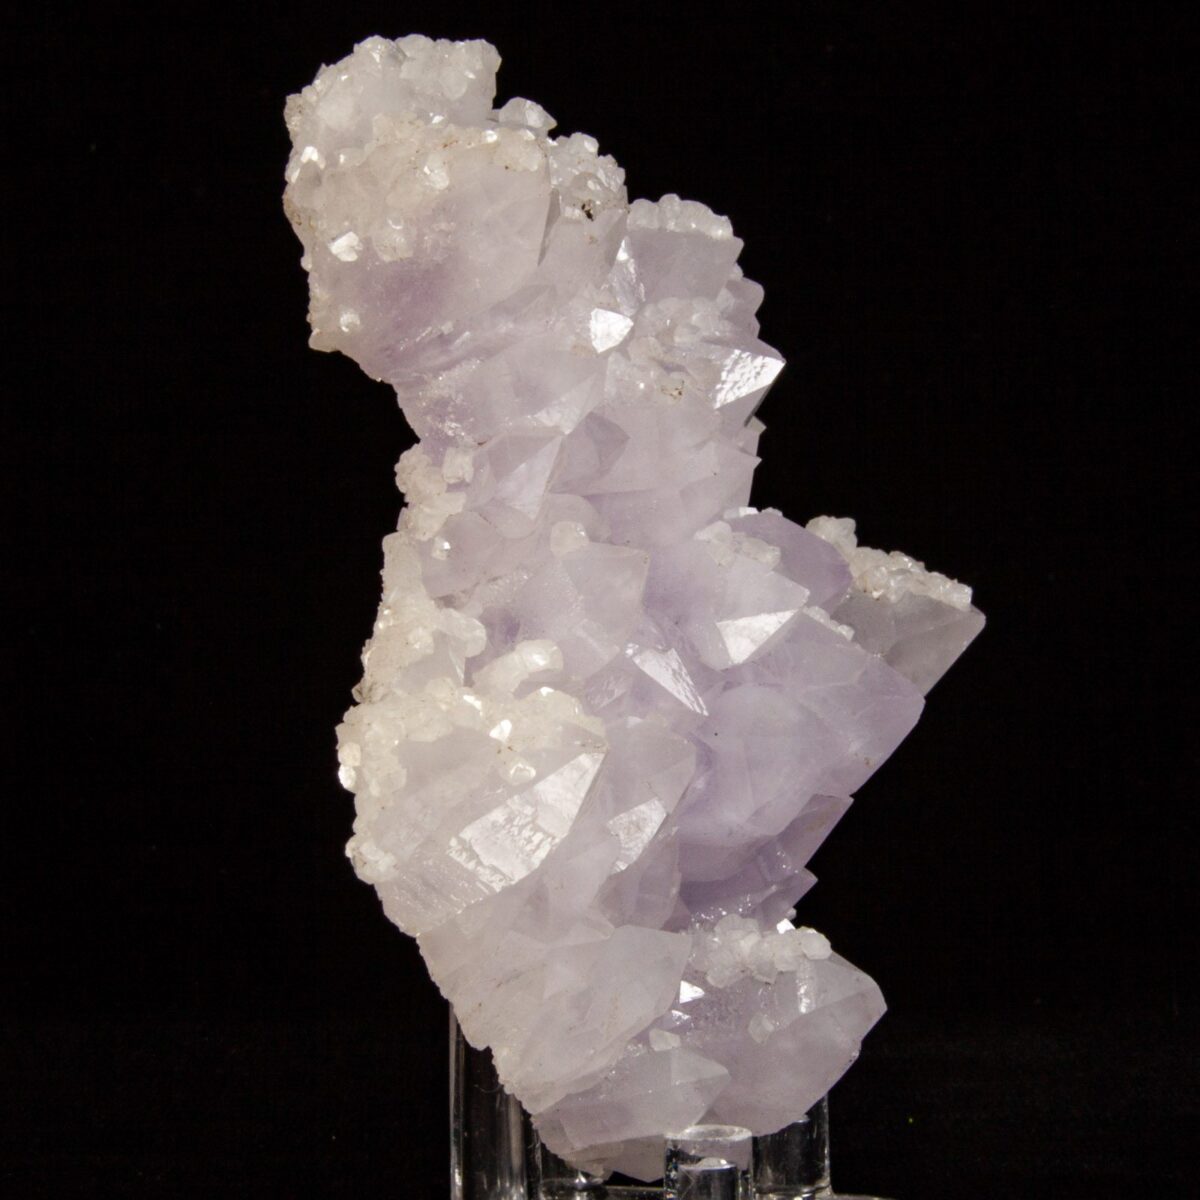 Amethyst and Calcite